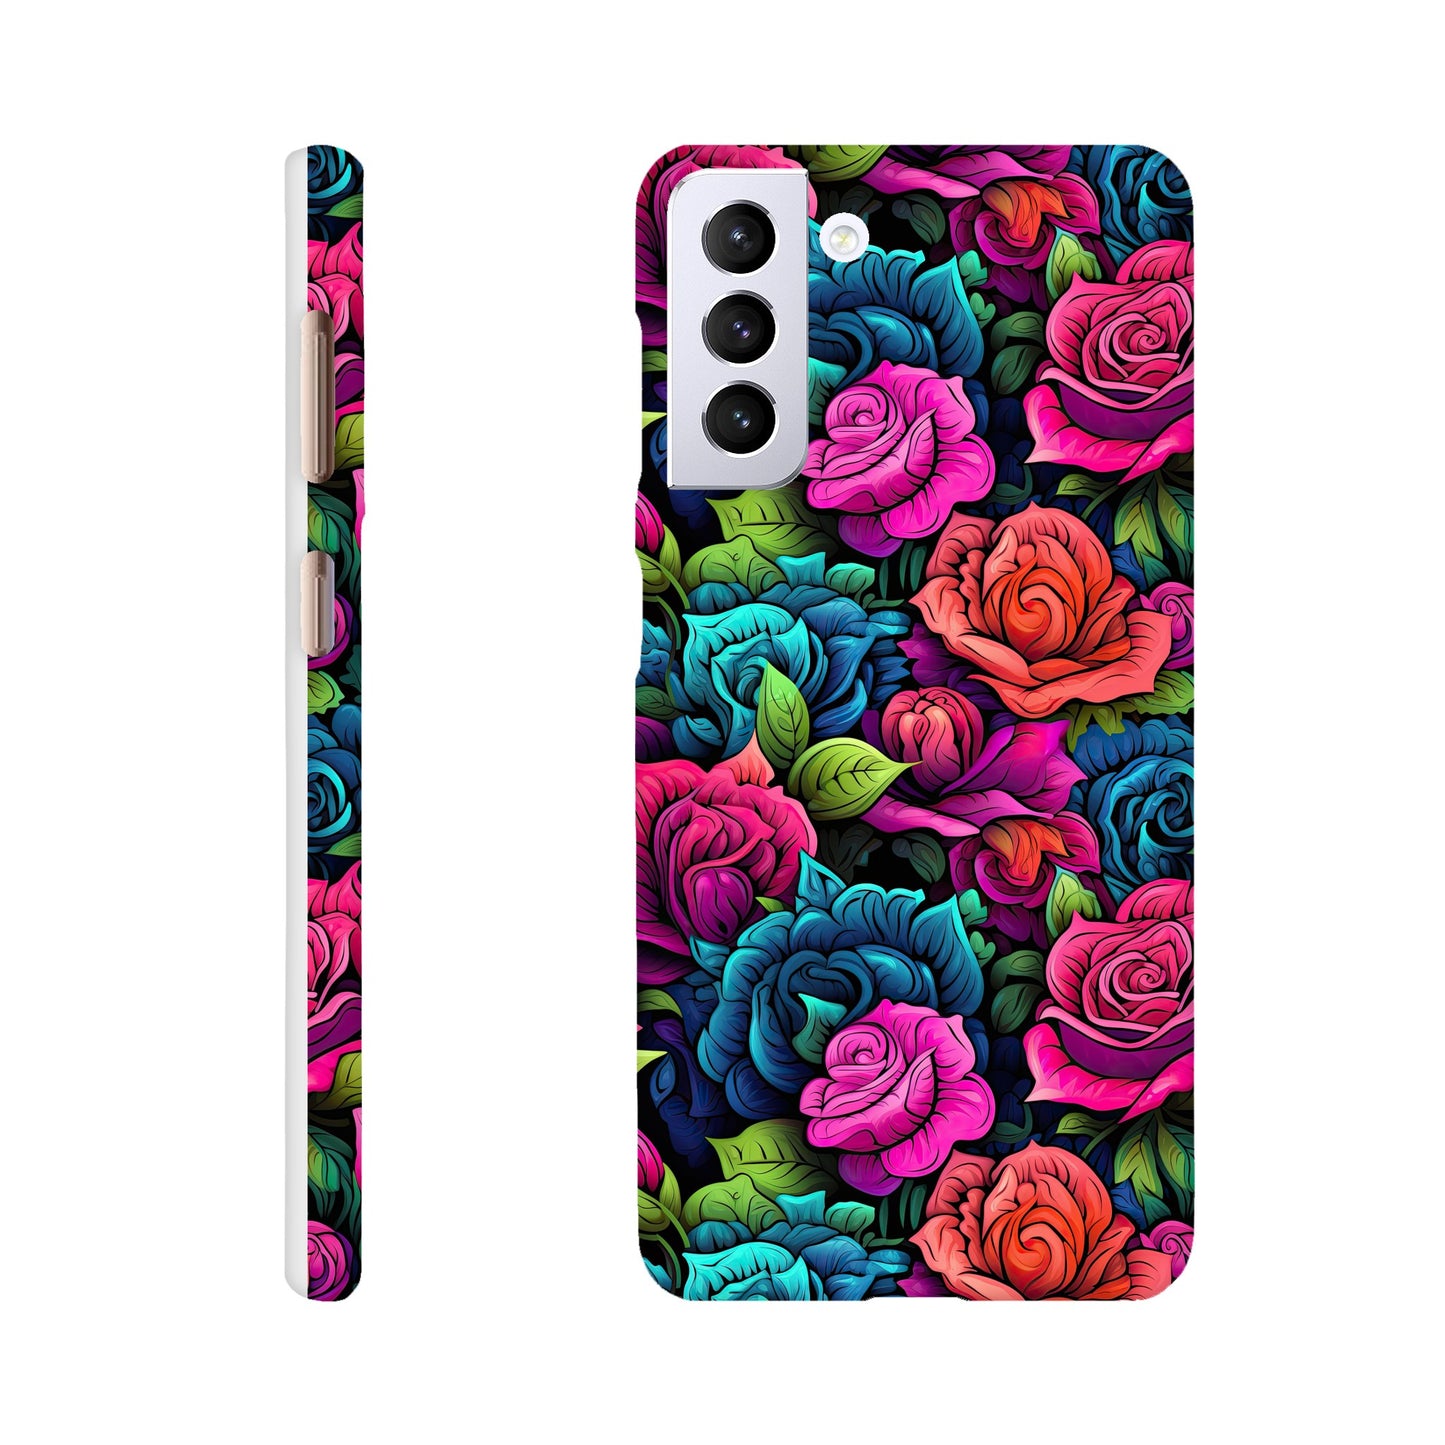 Blossoming Beauty: Colorful All-Over Rose Flower Print Phone Case for Android and Apple